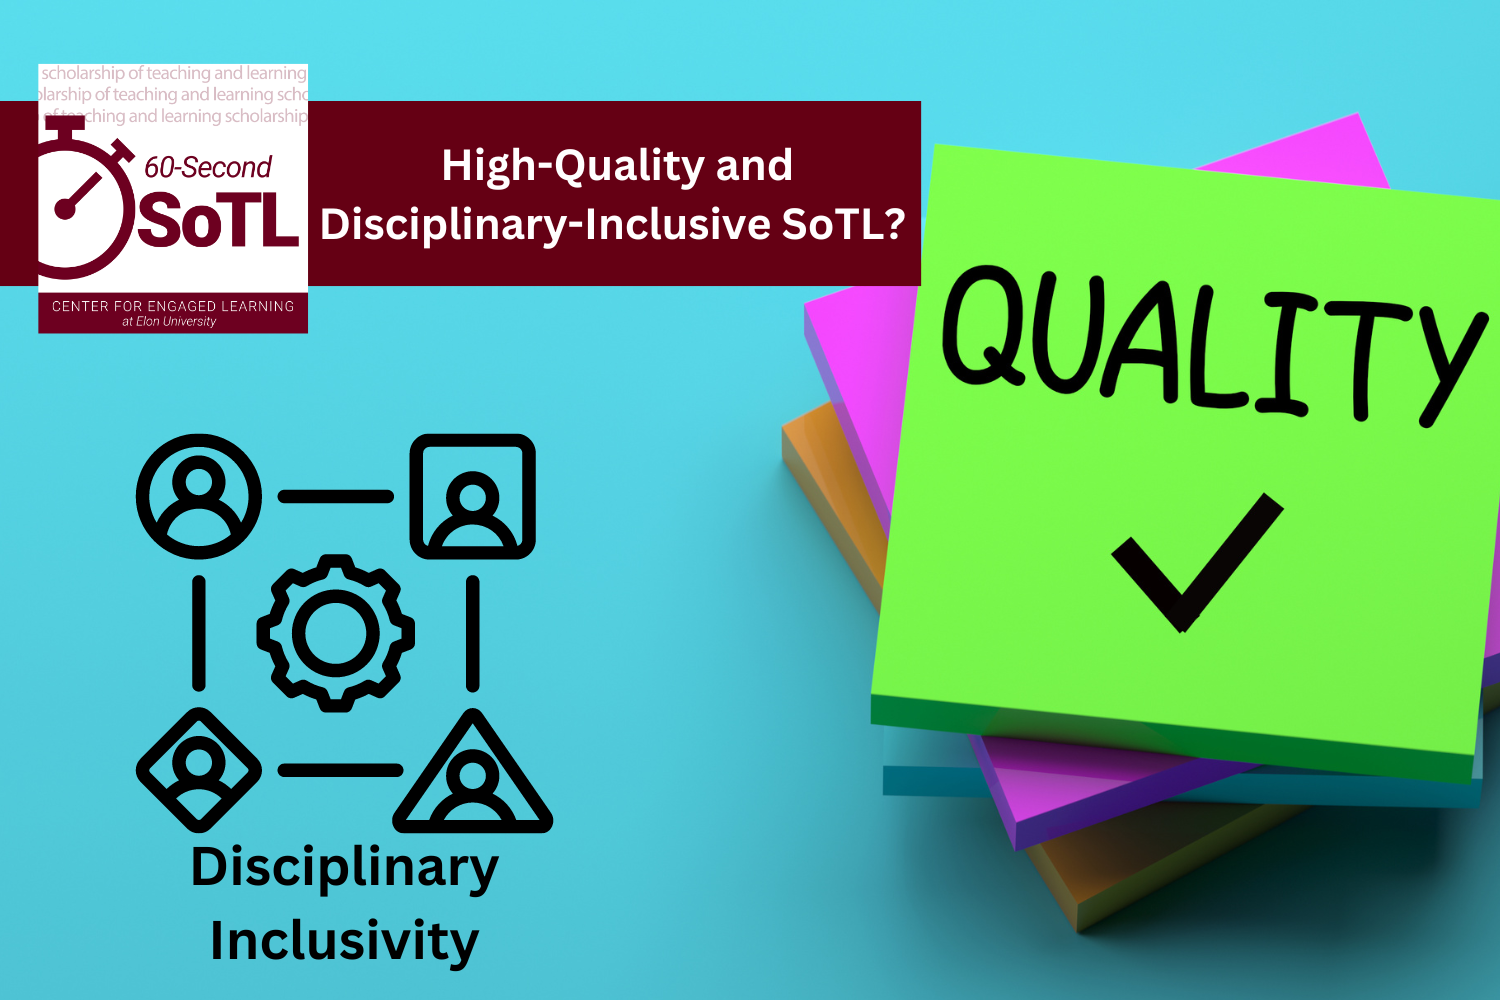 A stack of post-it notes has a check mark and "quality" written on the top sticky note. A figure linking four icons of people is labeled disciplinary inclusivity. An overlay reads, "60-Second SoTL: High-Quality and Disciplinary-Inclusive SoTL?"